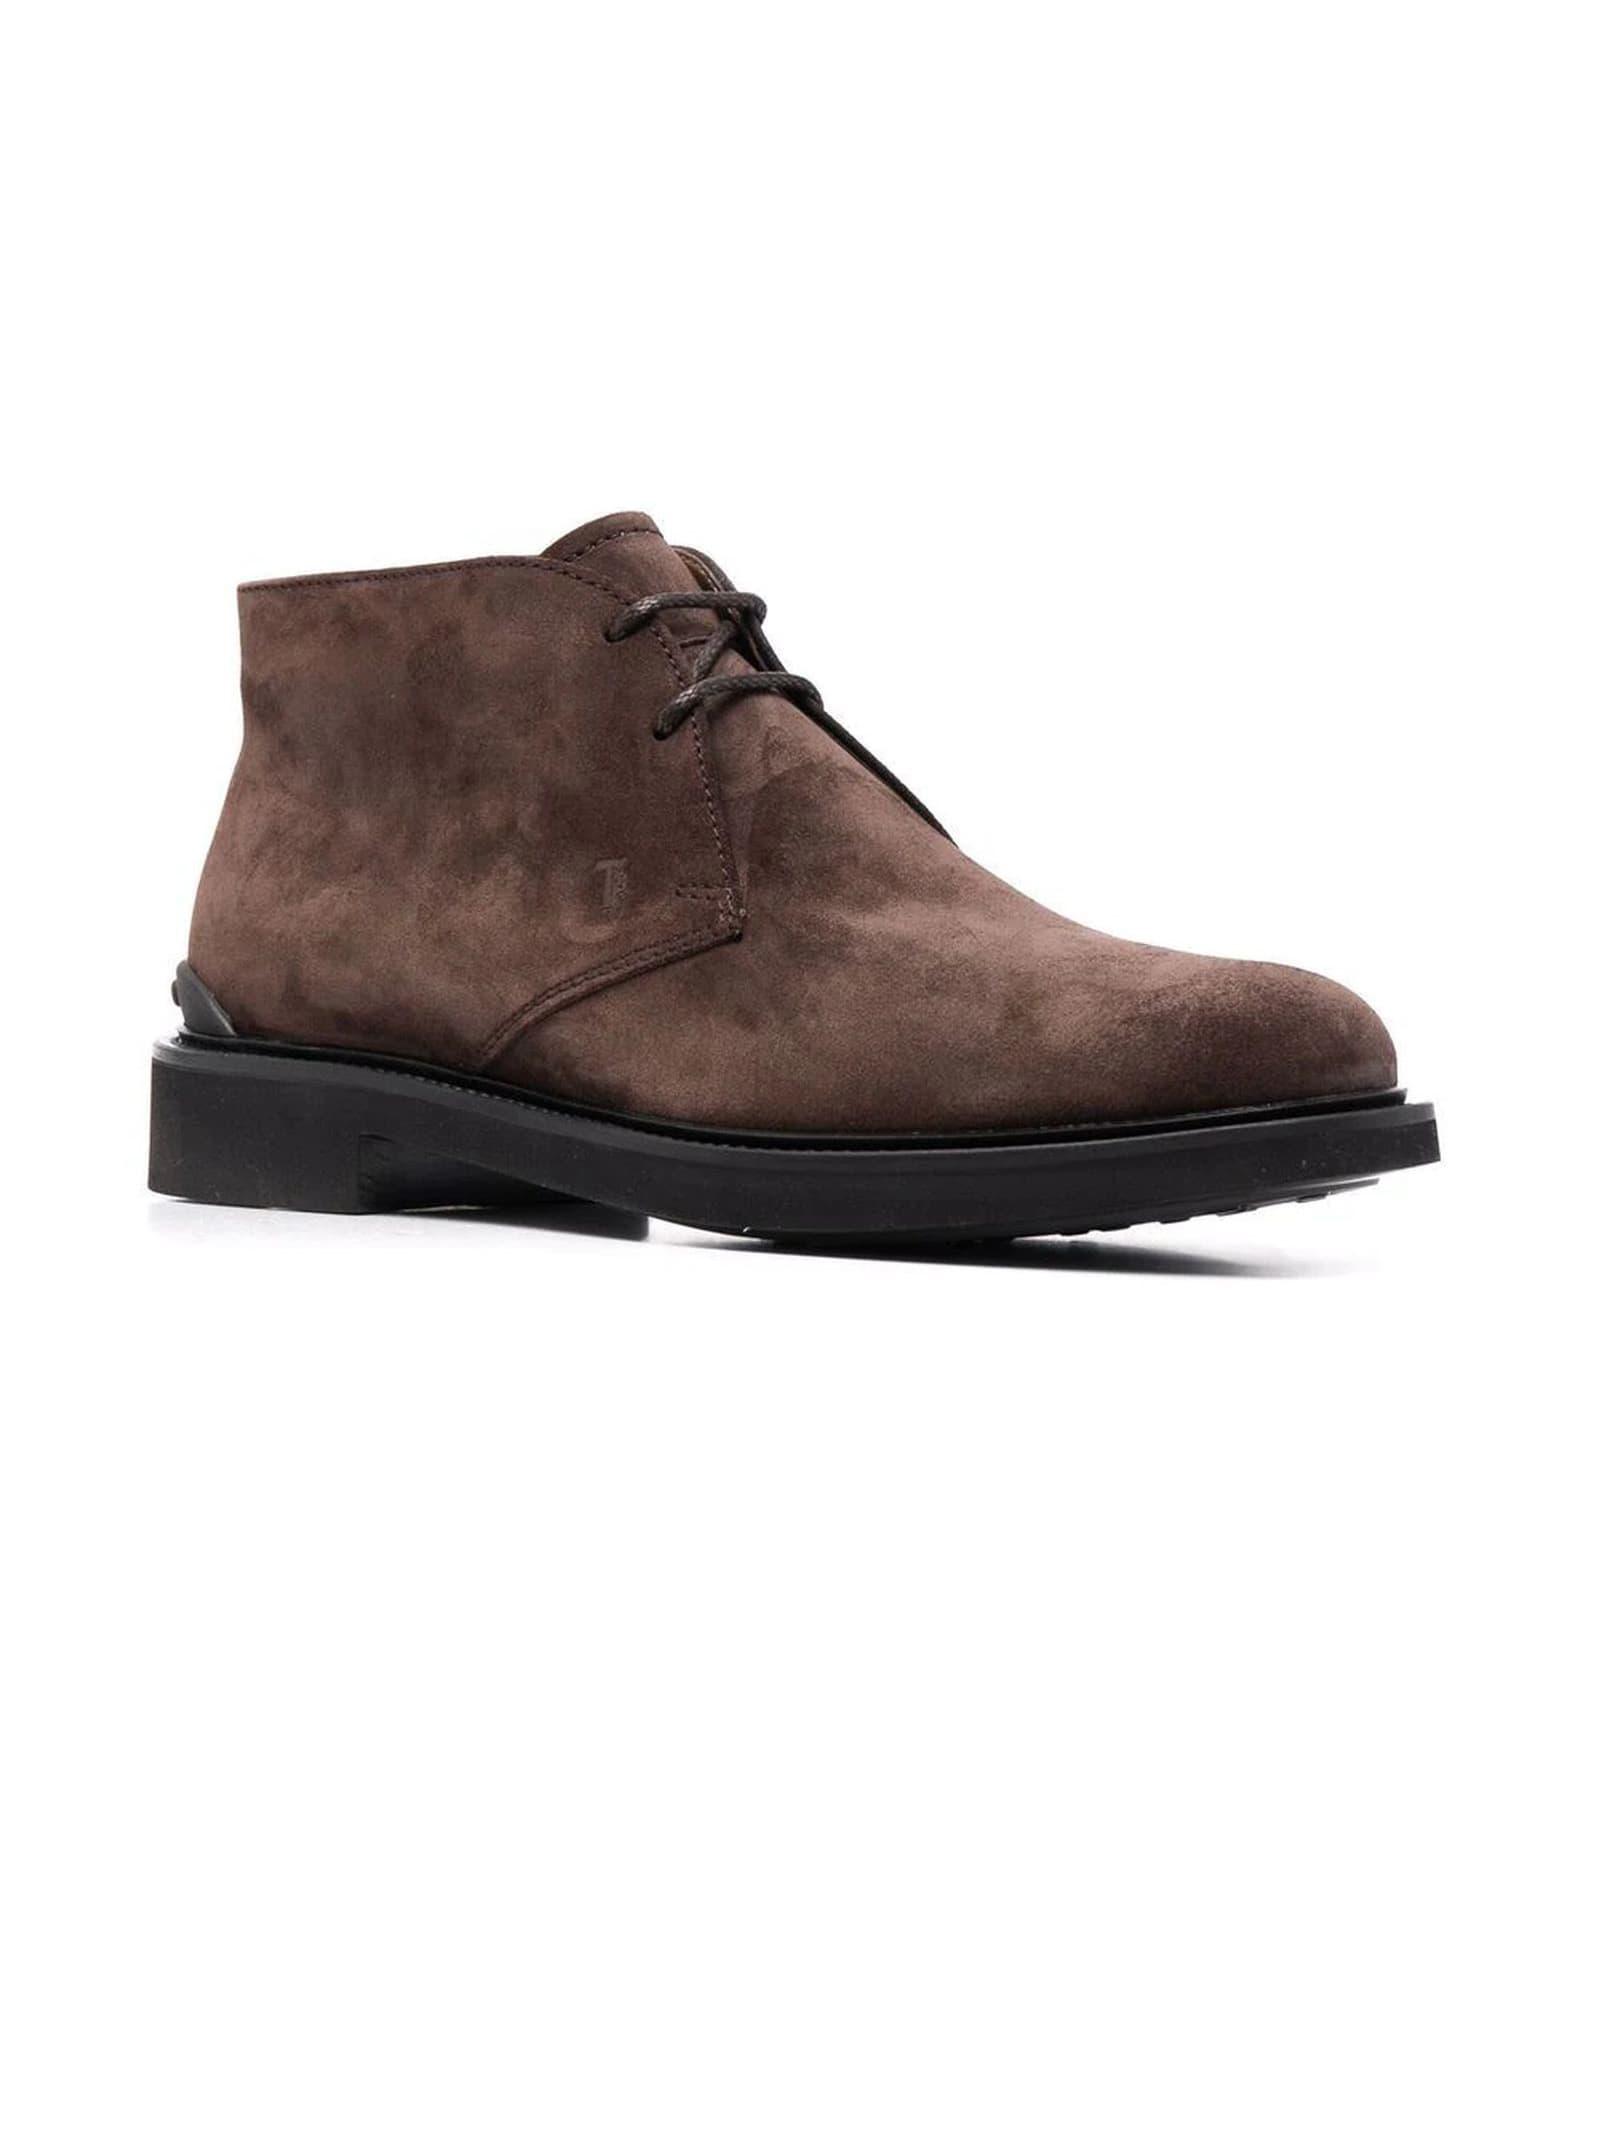 Tods W.g Desert Suede Boots in Brown for Men Mens Shoes Boots Chukka boots and desert boots 